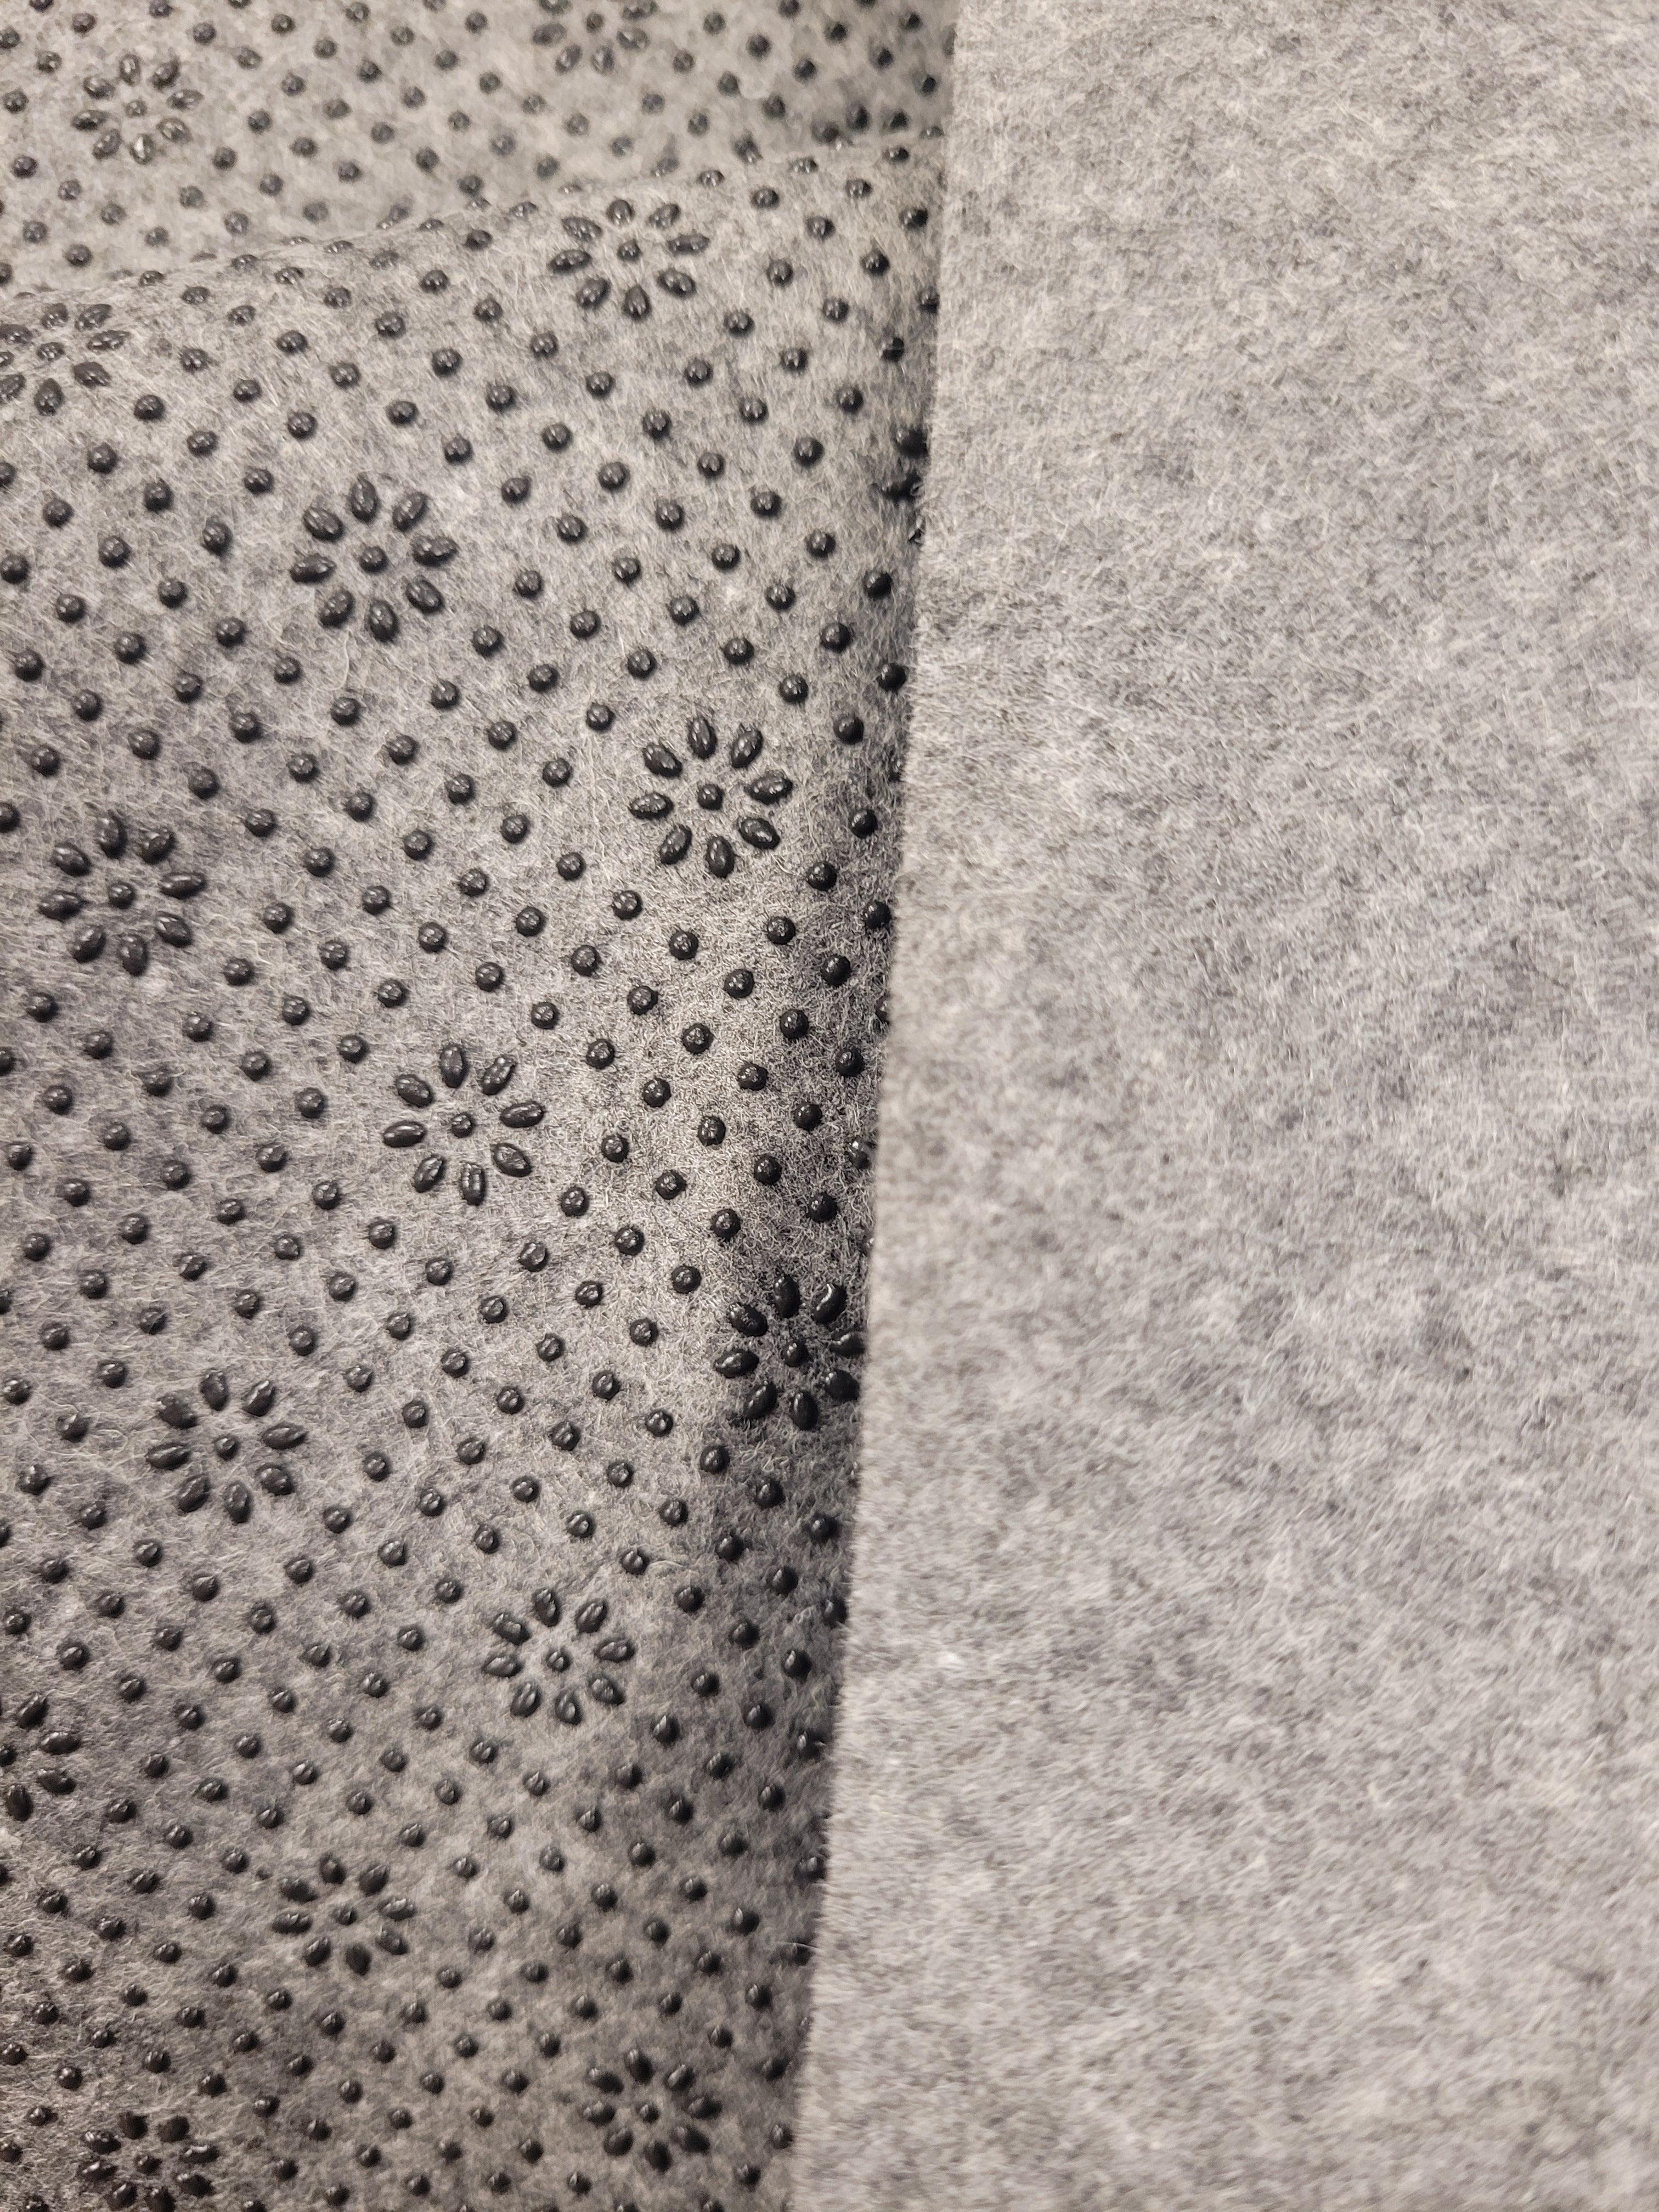 Backing Rug Fabric for Tufting with Grippy Non Slip Rubber Dots